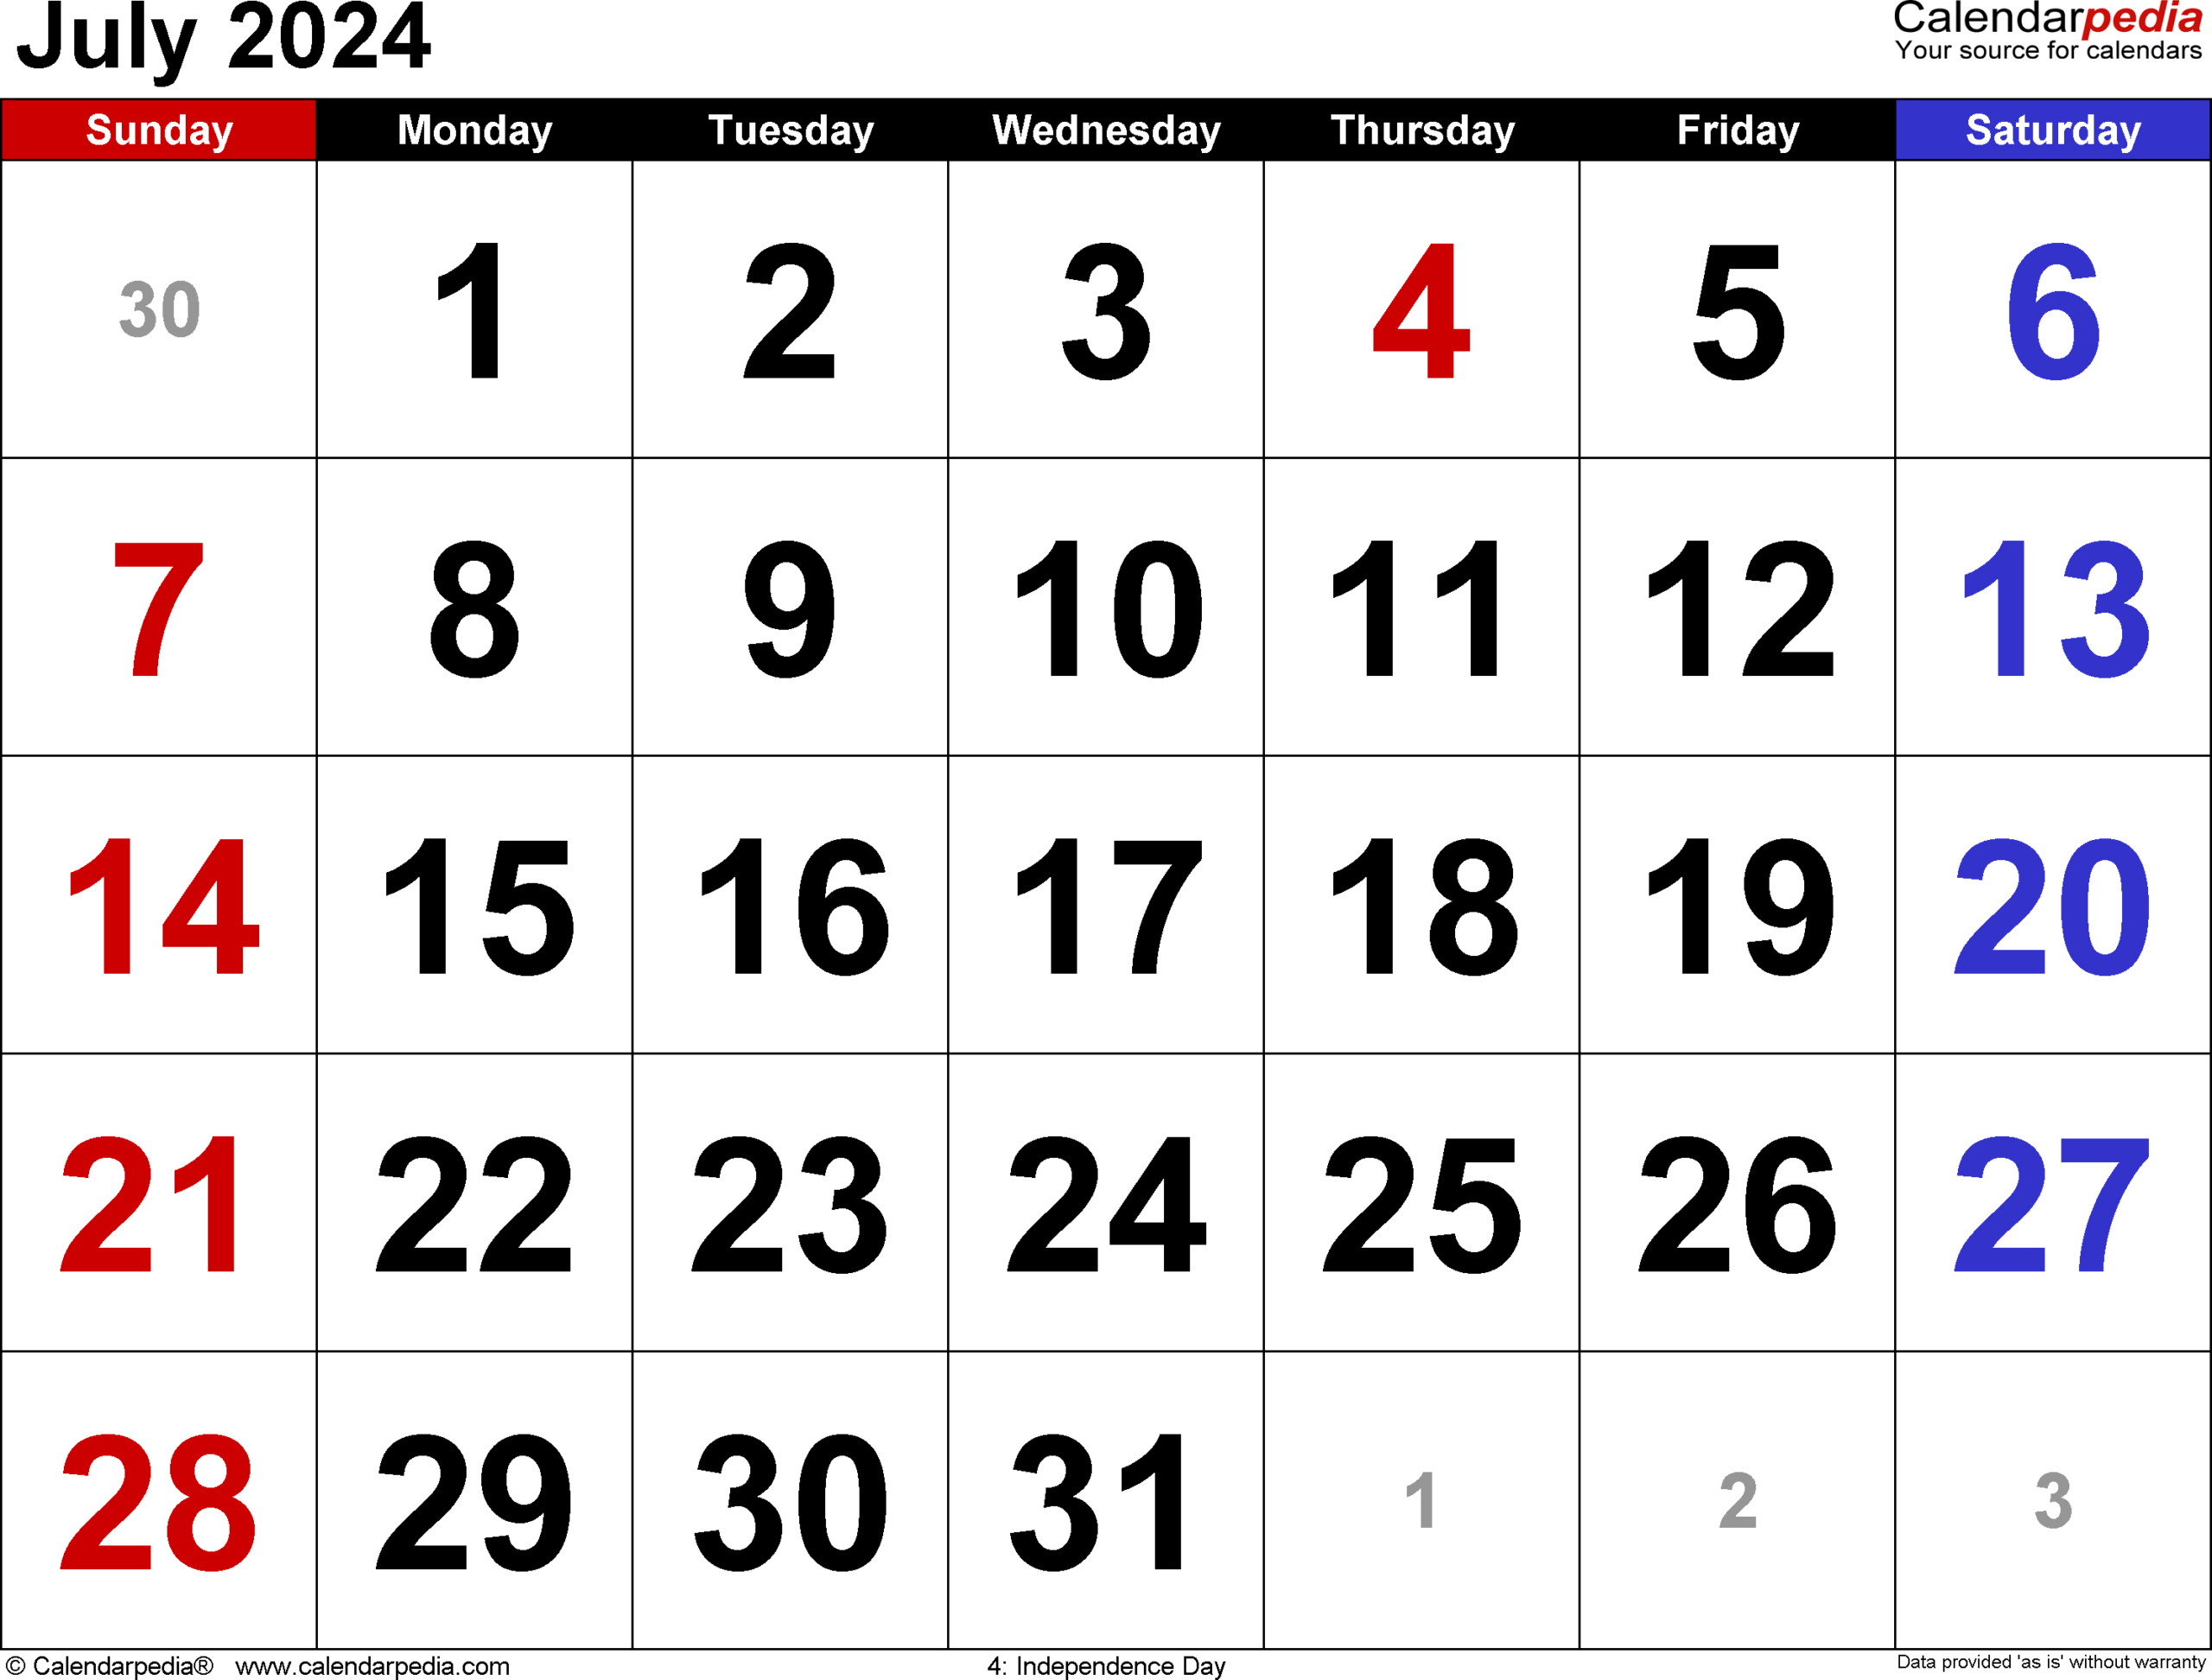 July 2024 Calendar | Templates For Word, Excel And Pdf intended for July 2024 Calendar Days